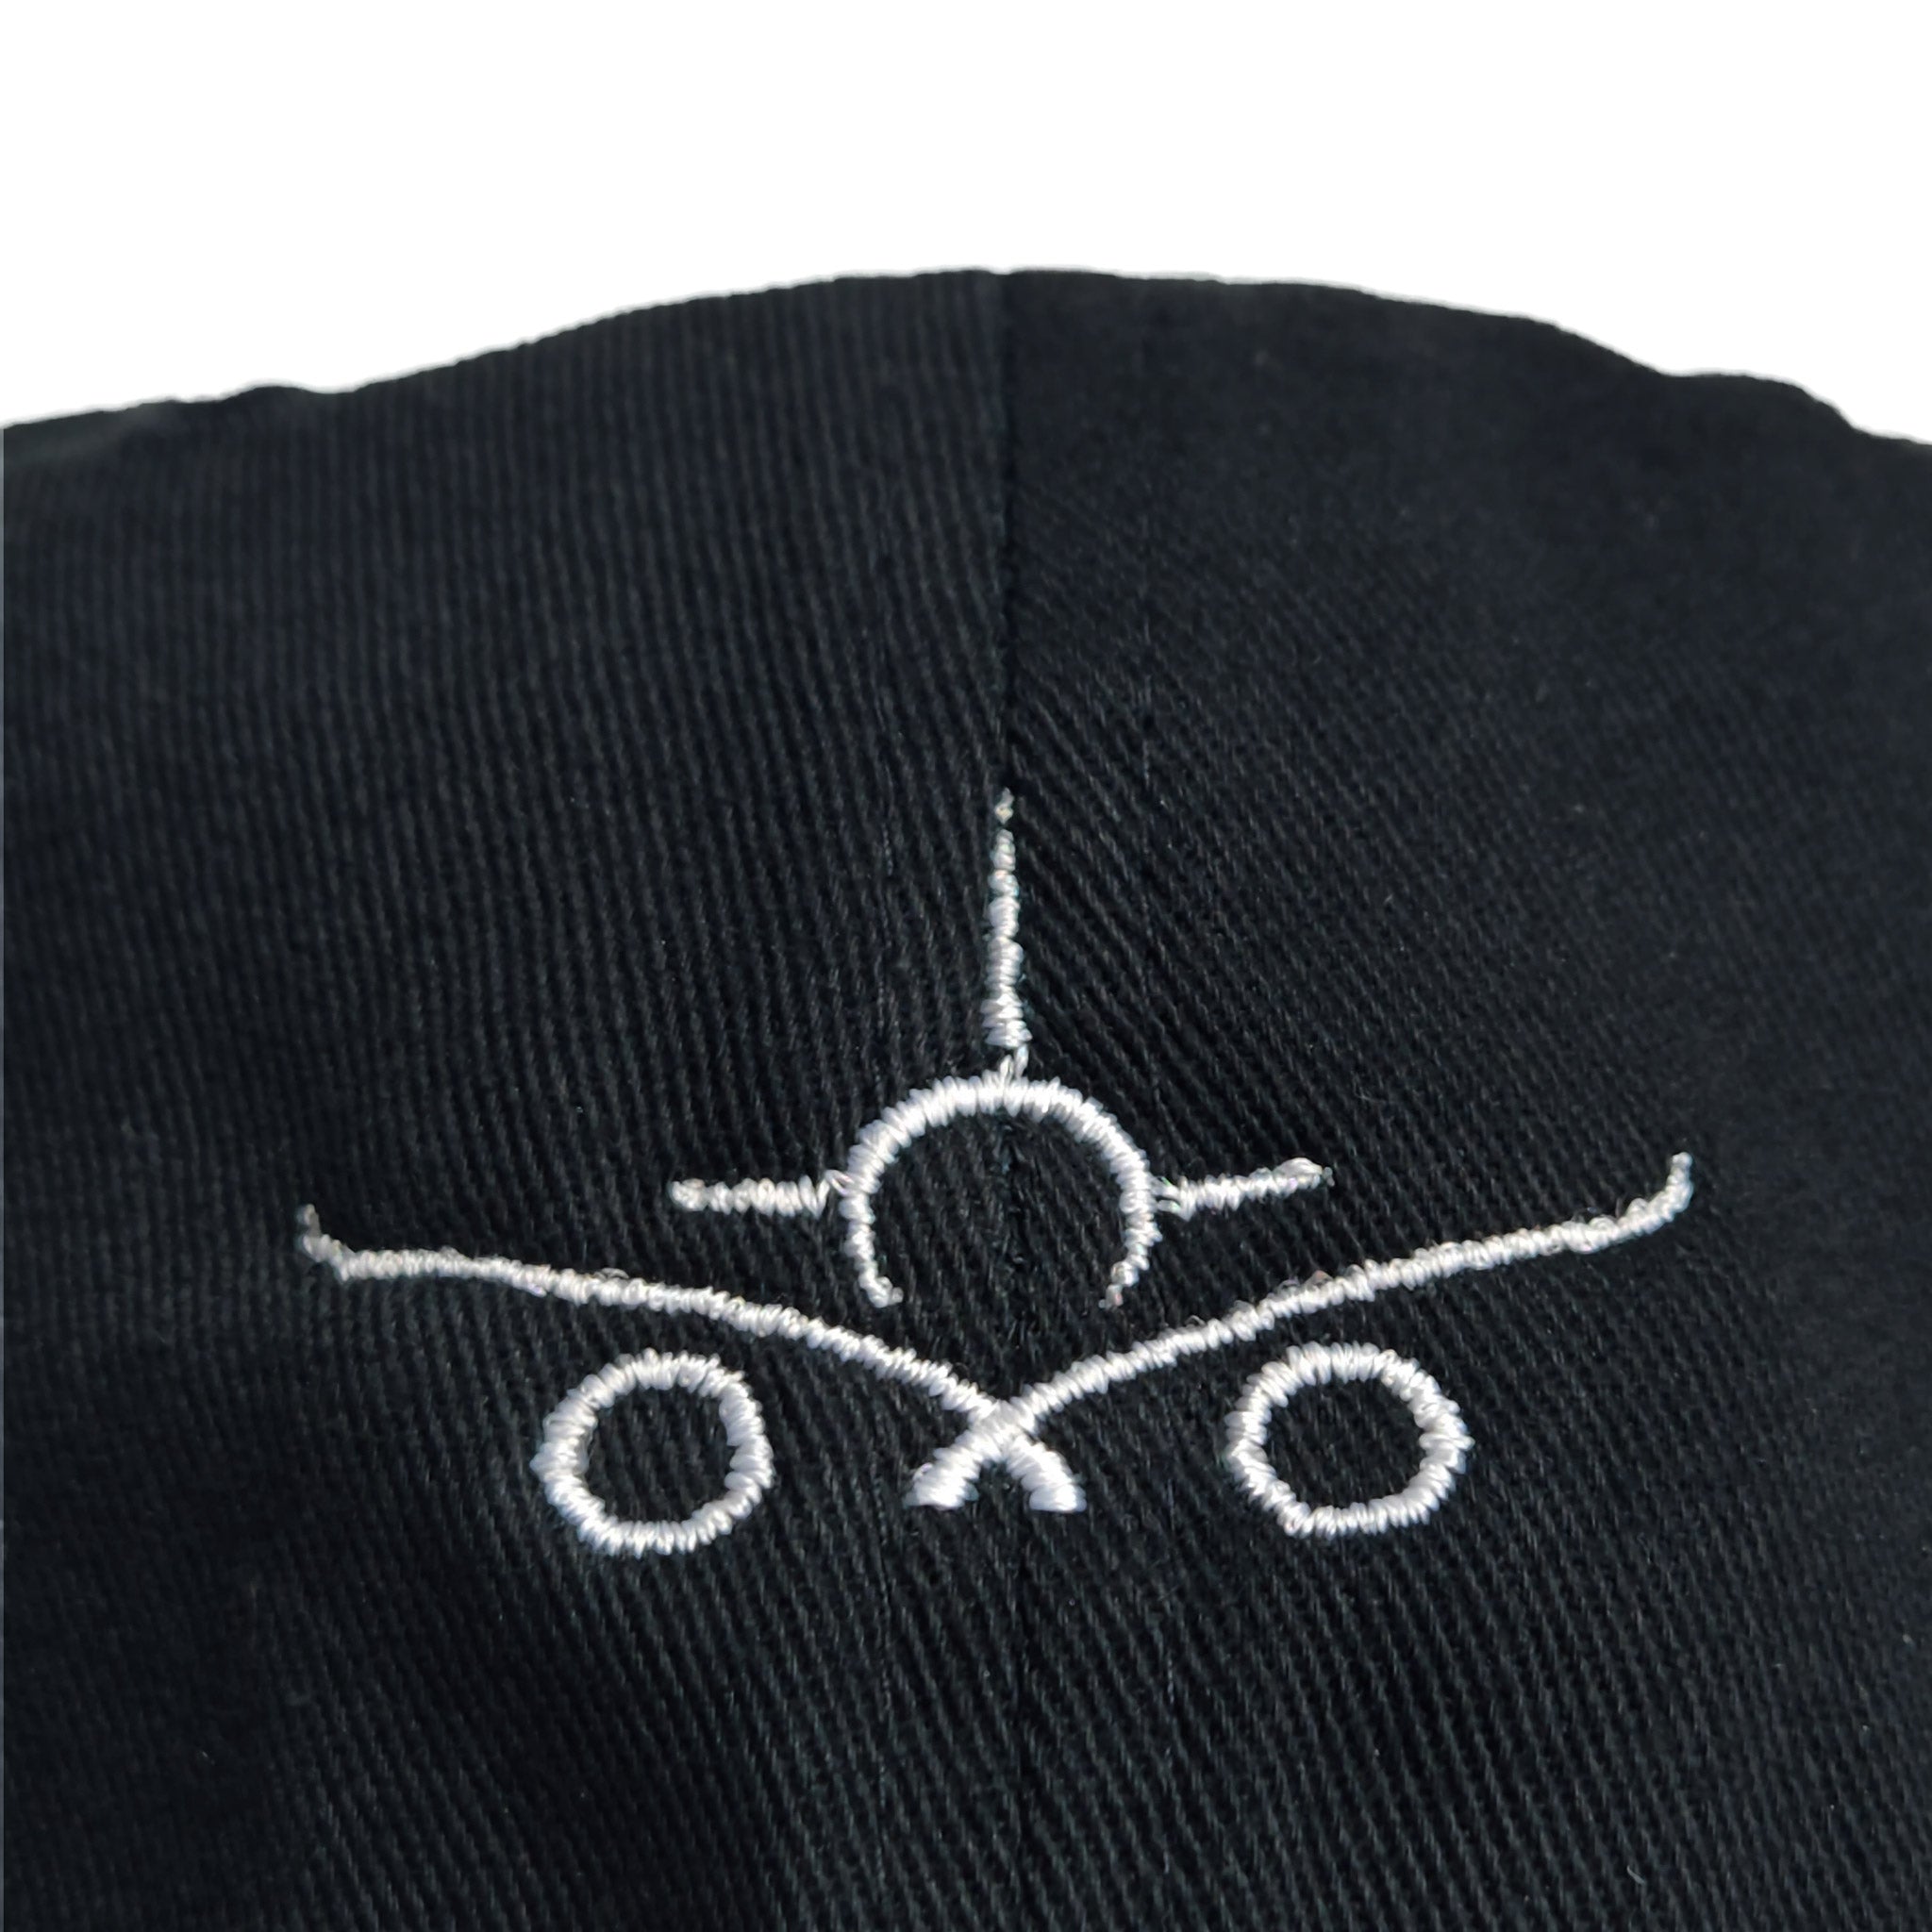 "The Classic" - Unstructured Black Aviation Dad Cap w/ White Embroidered Logo